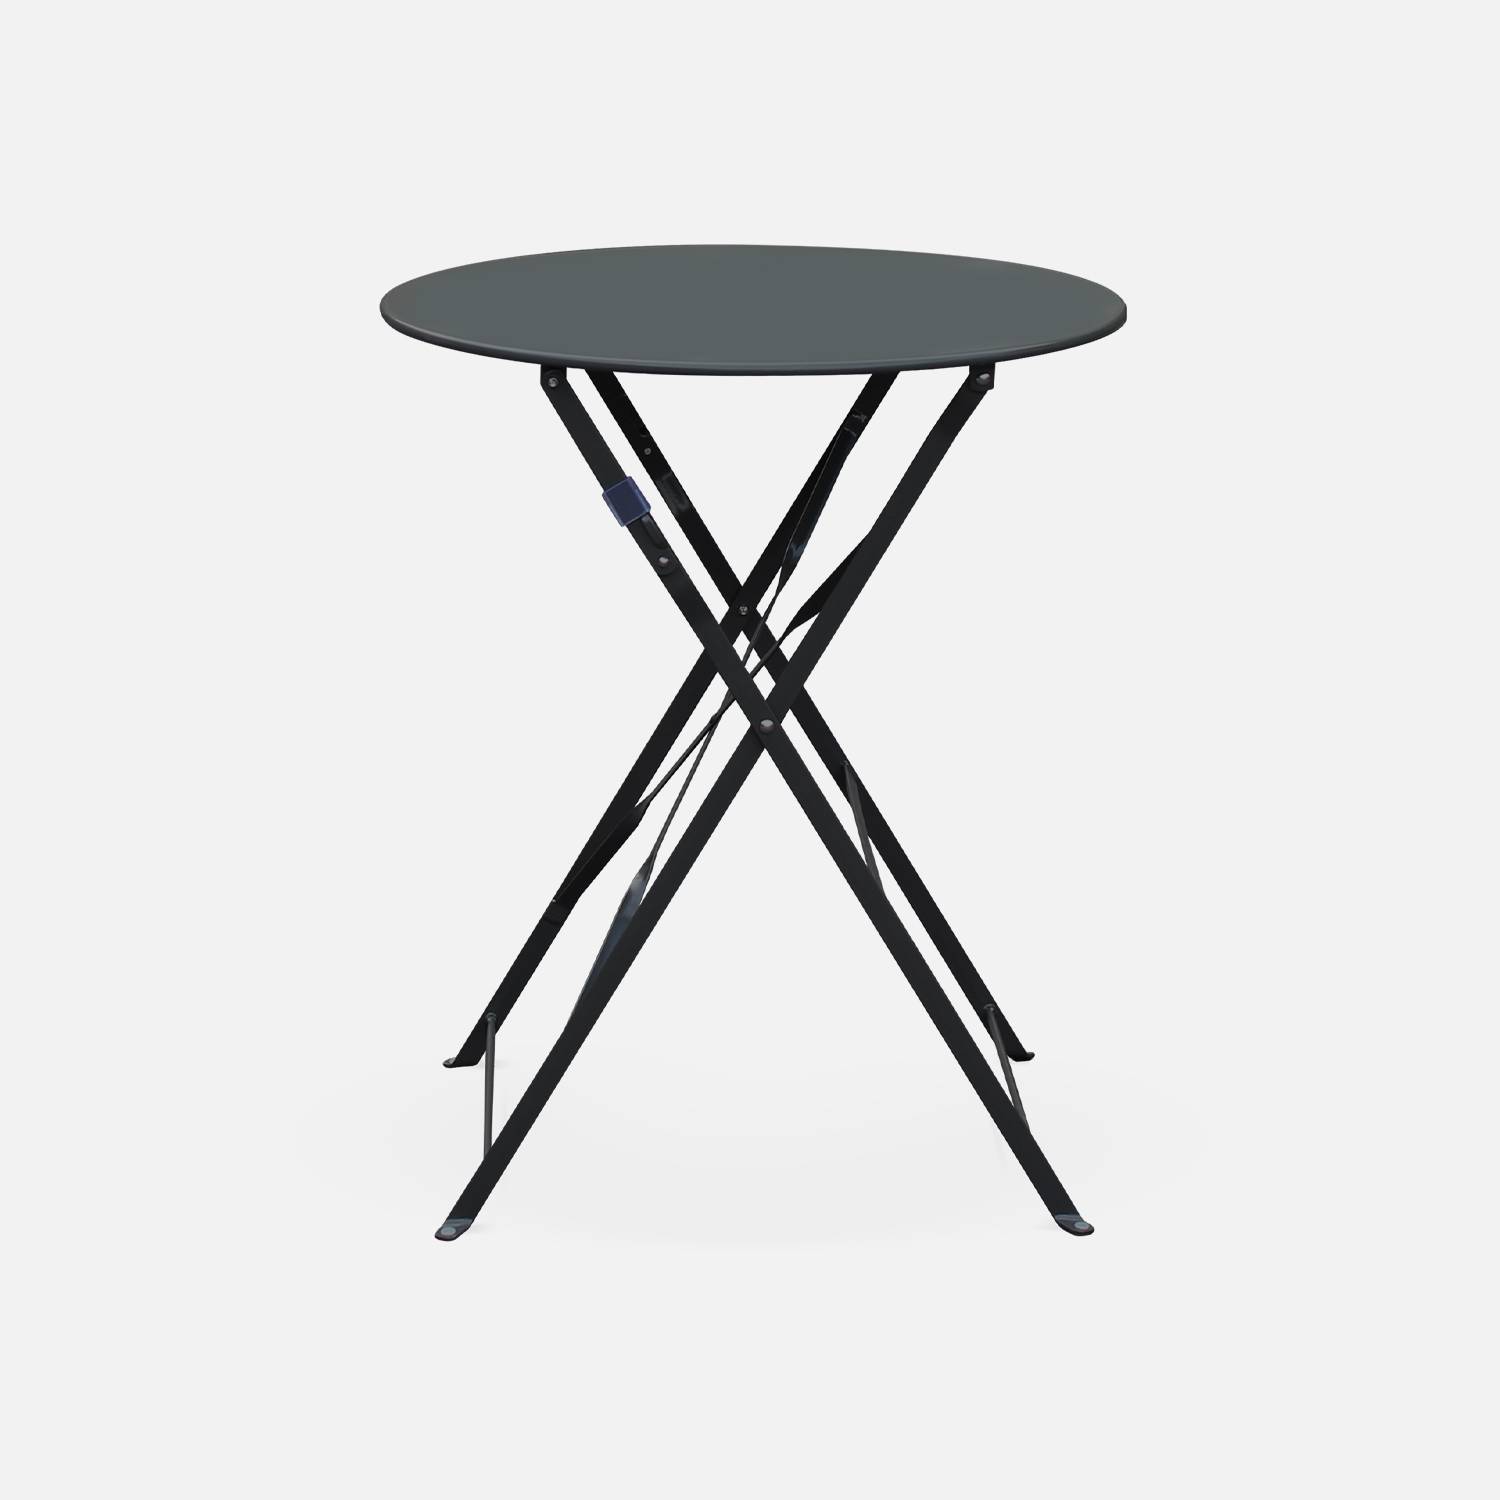 2-seater foldable thermo-lacquered steel bistro garden table with chairs, Ø60cm - Emilia - Anthracite Photo3